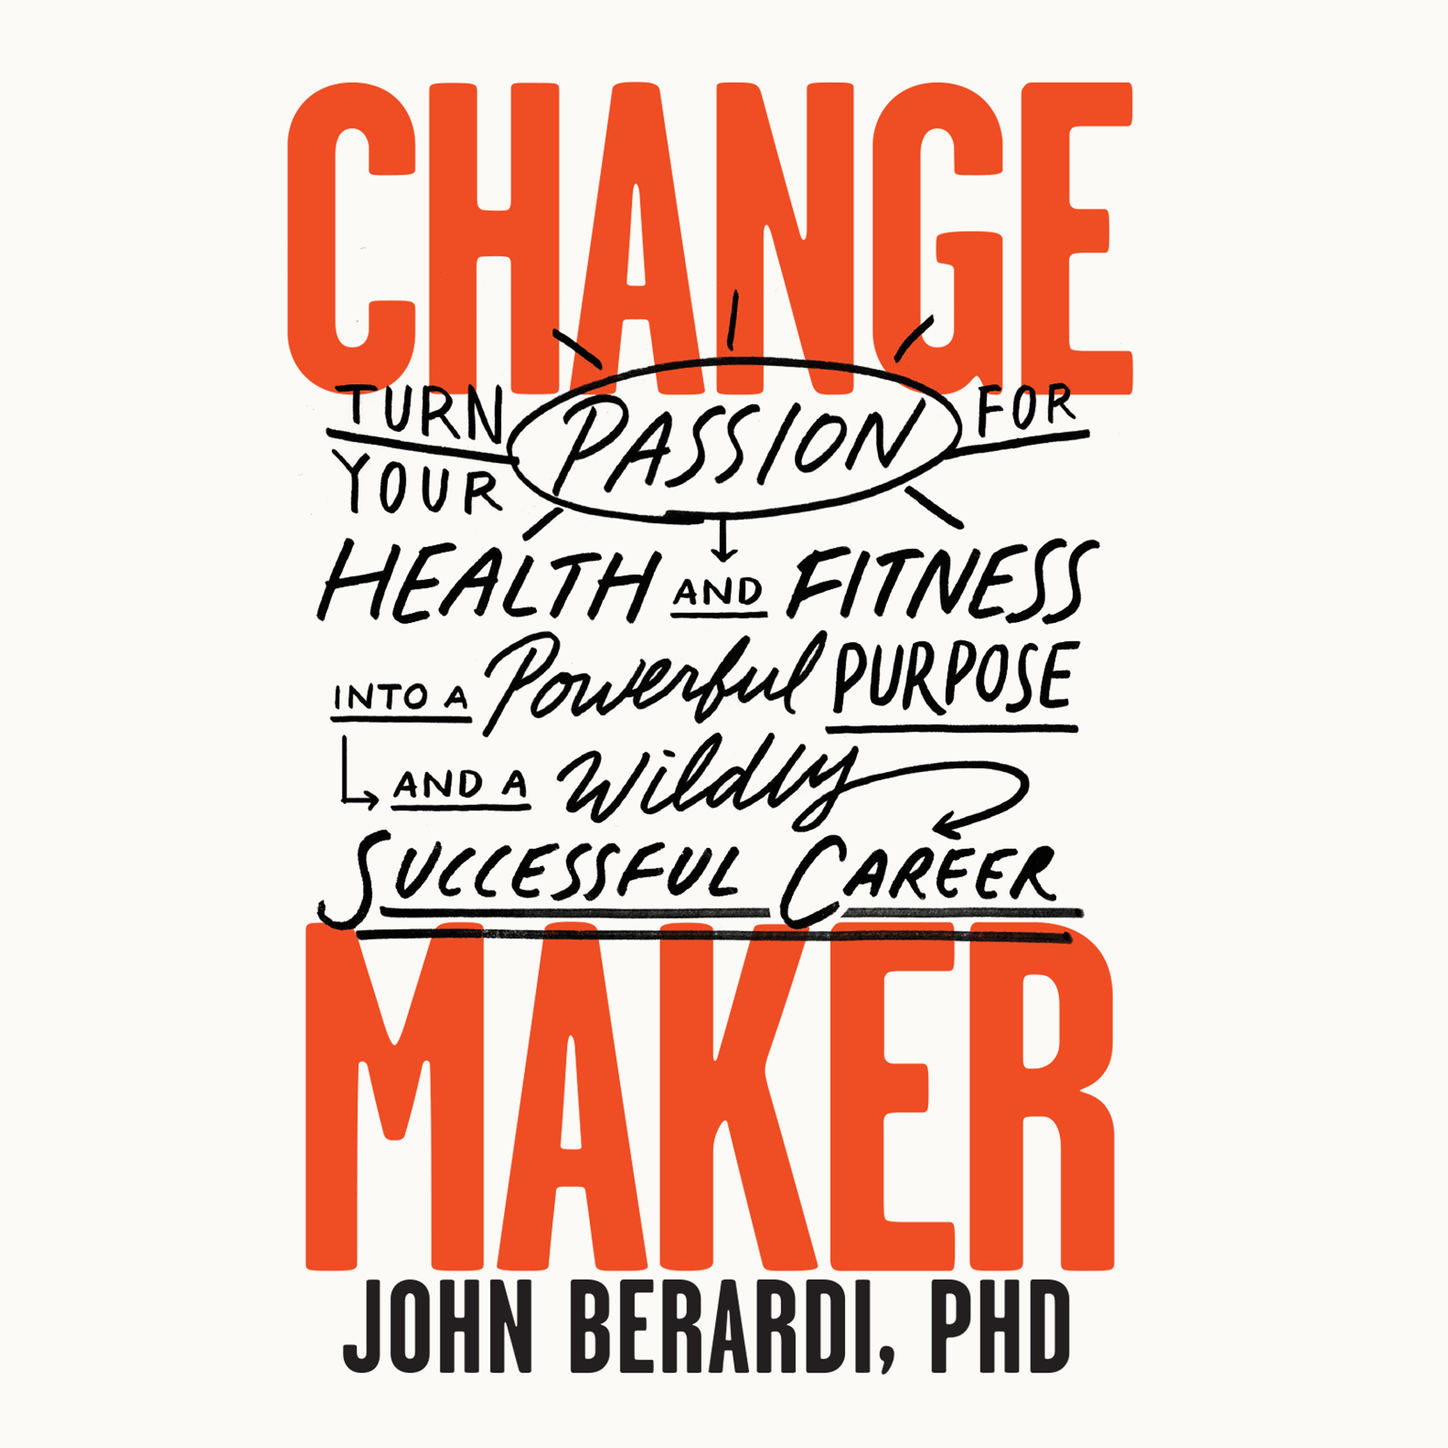 Change Maker - Turn Your Passion for Health and Fitness into a Powerful Purpose and a Wildly Successful Career (Unabridged), John Berardi PhD